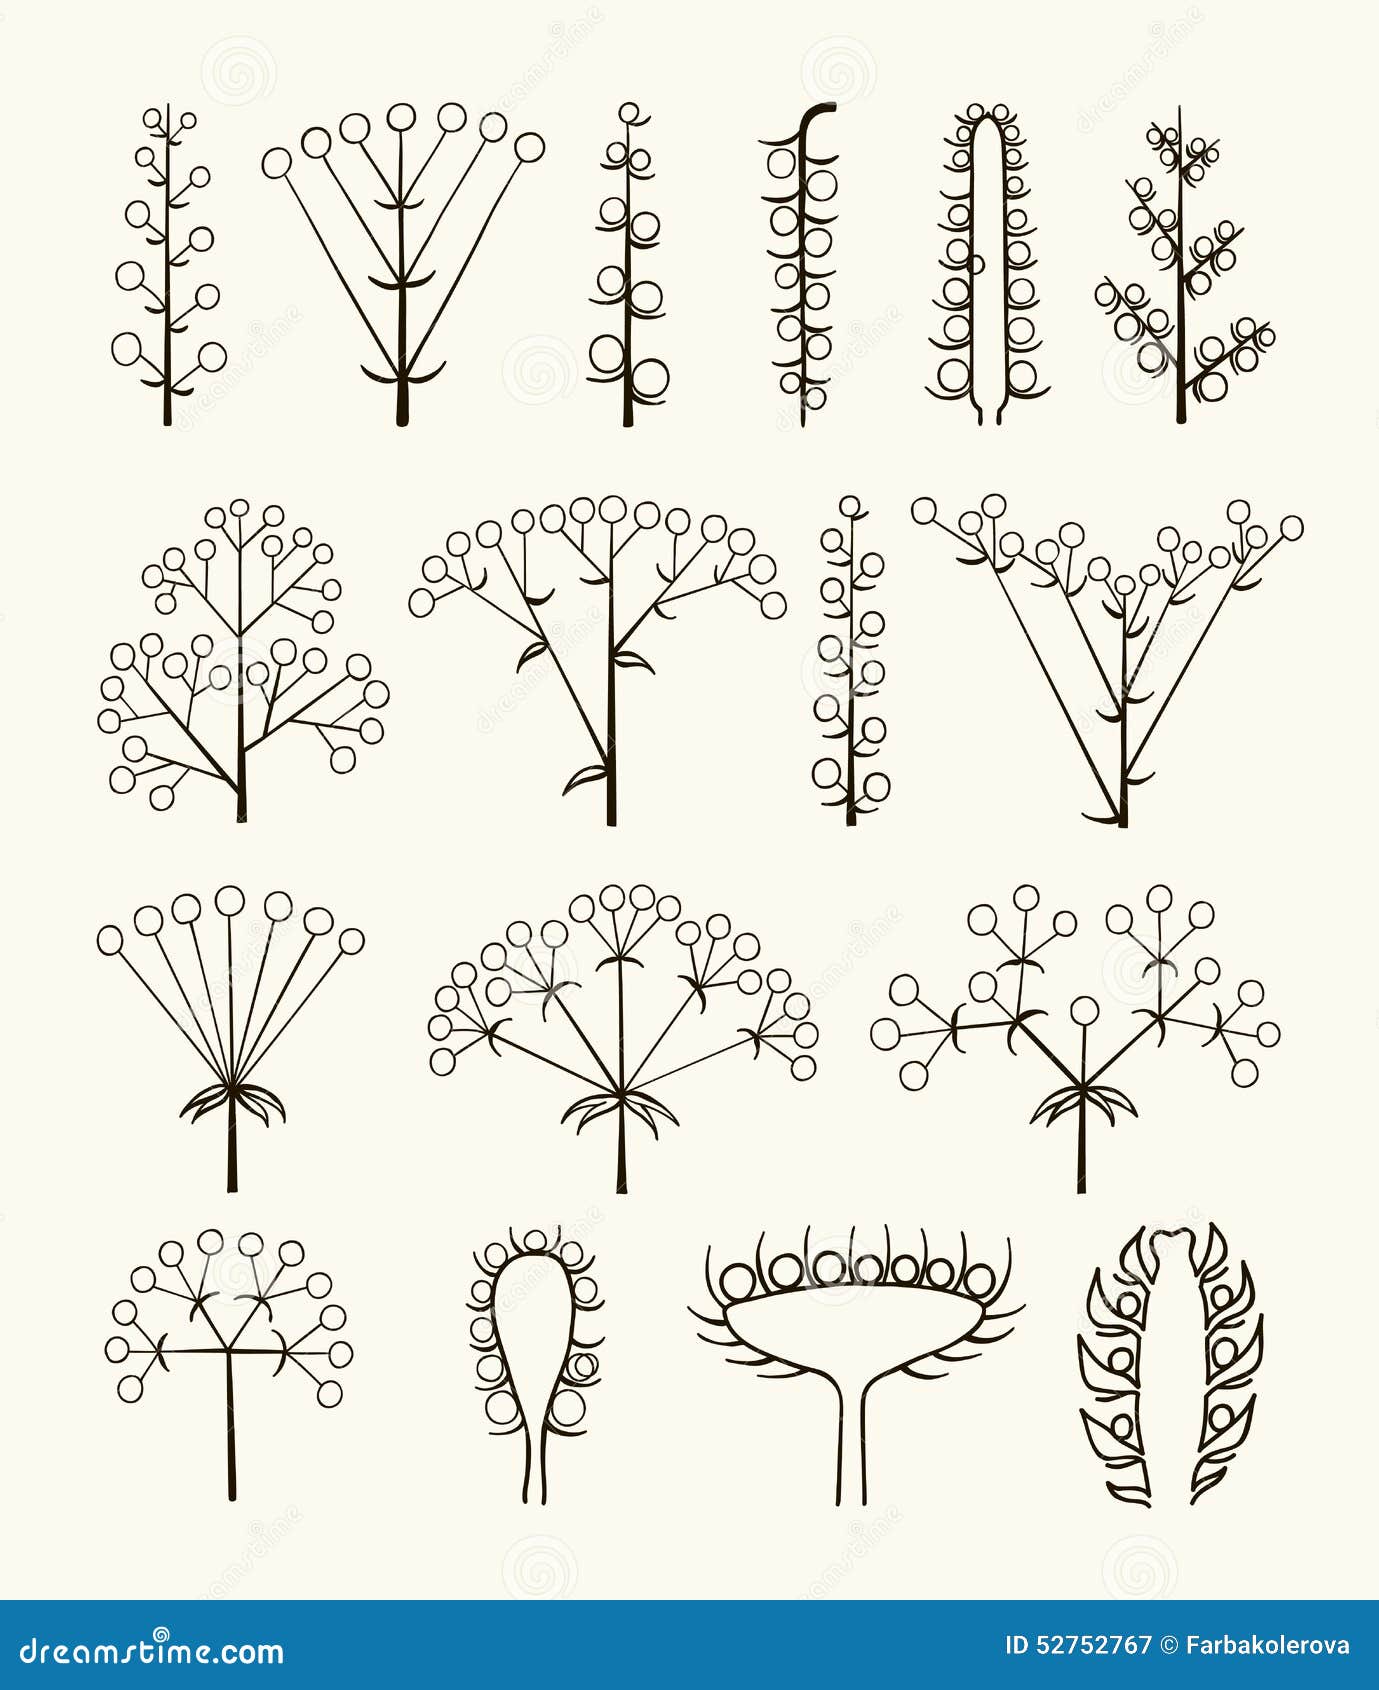 set of  different types of inflorescence